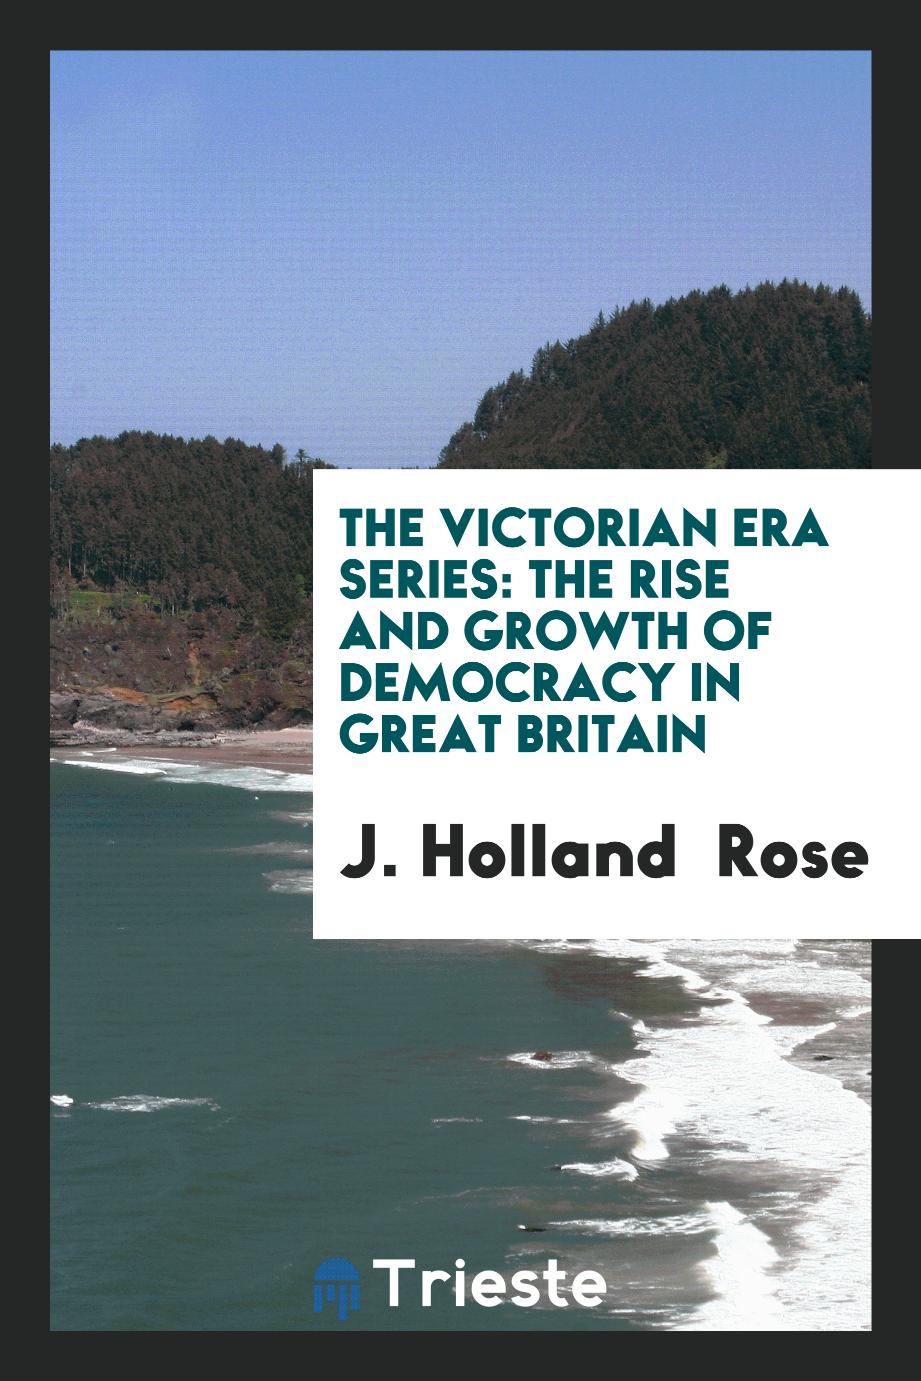 The Victorian Era Series: The Rise and Growth of Democracy in Great Britain